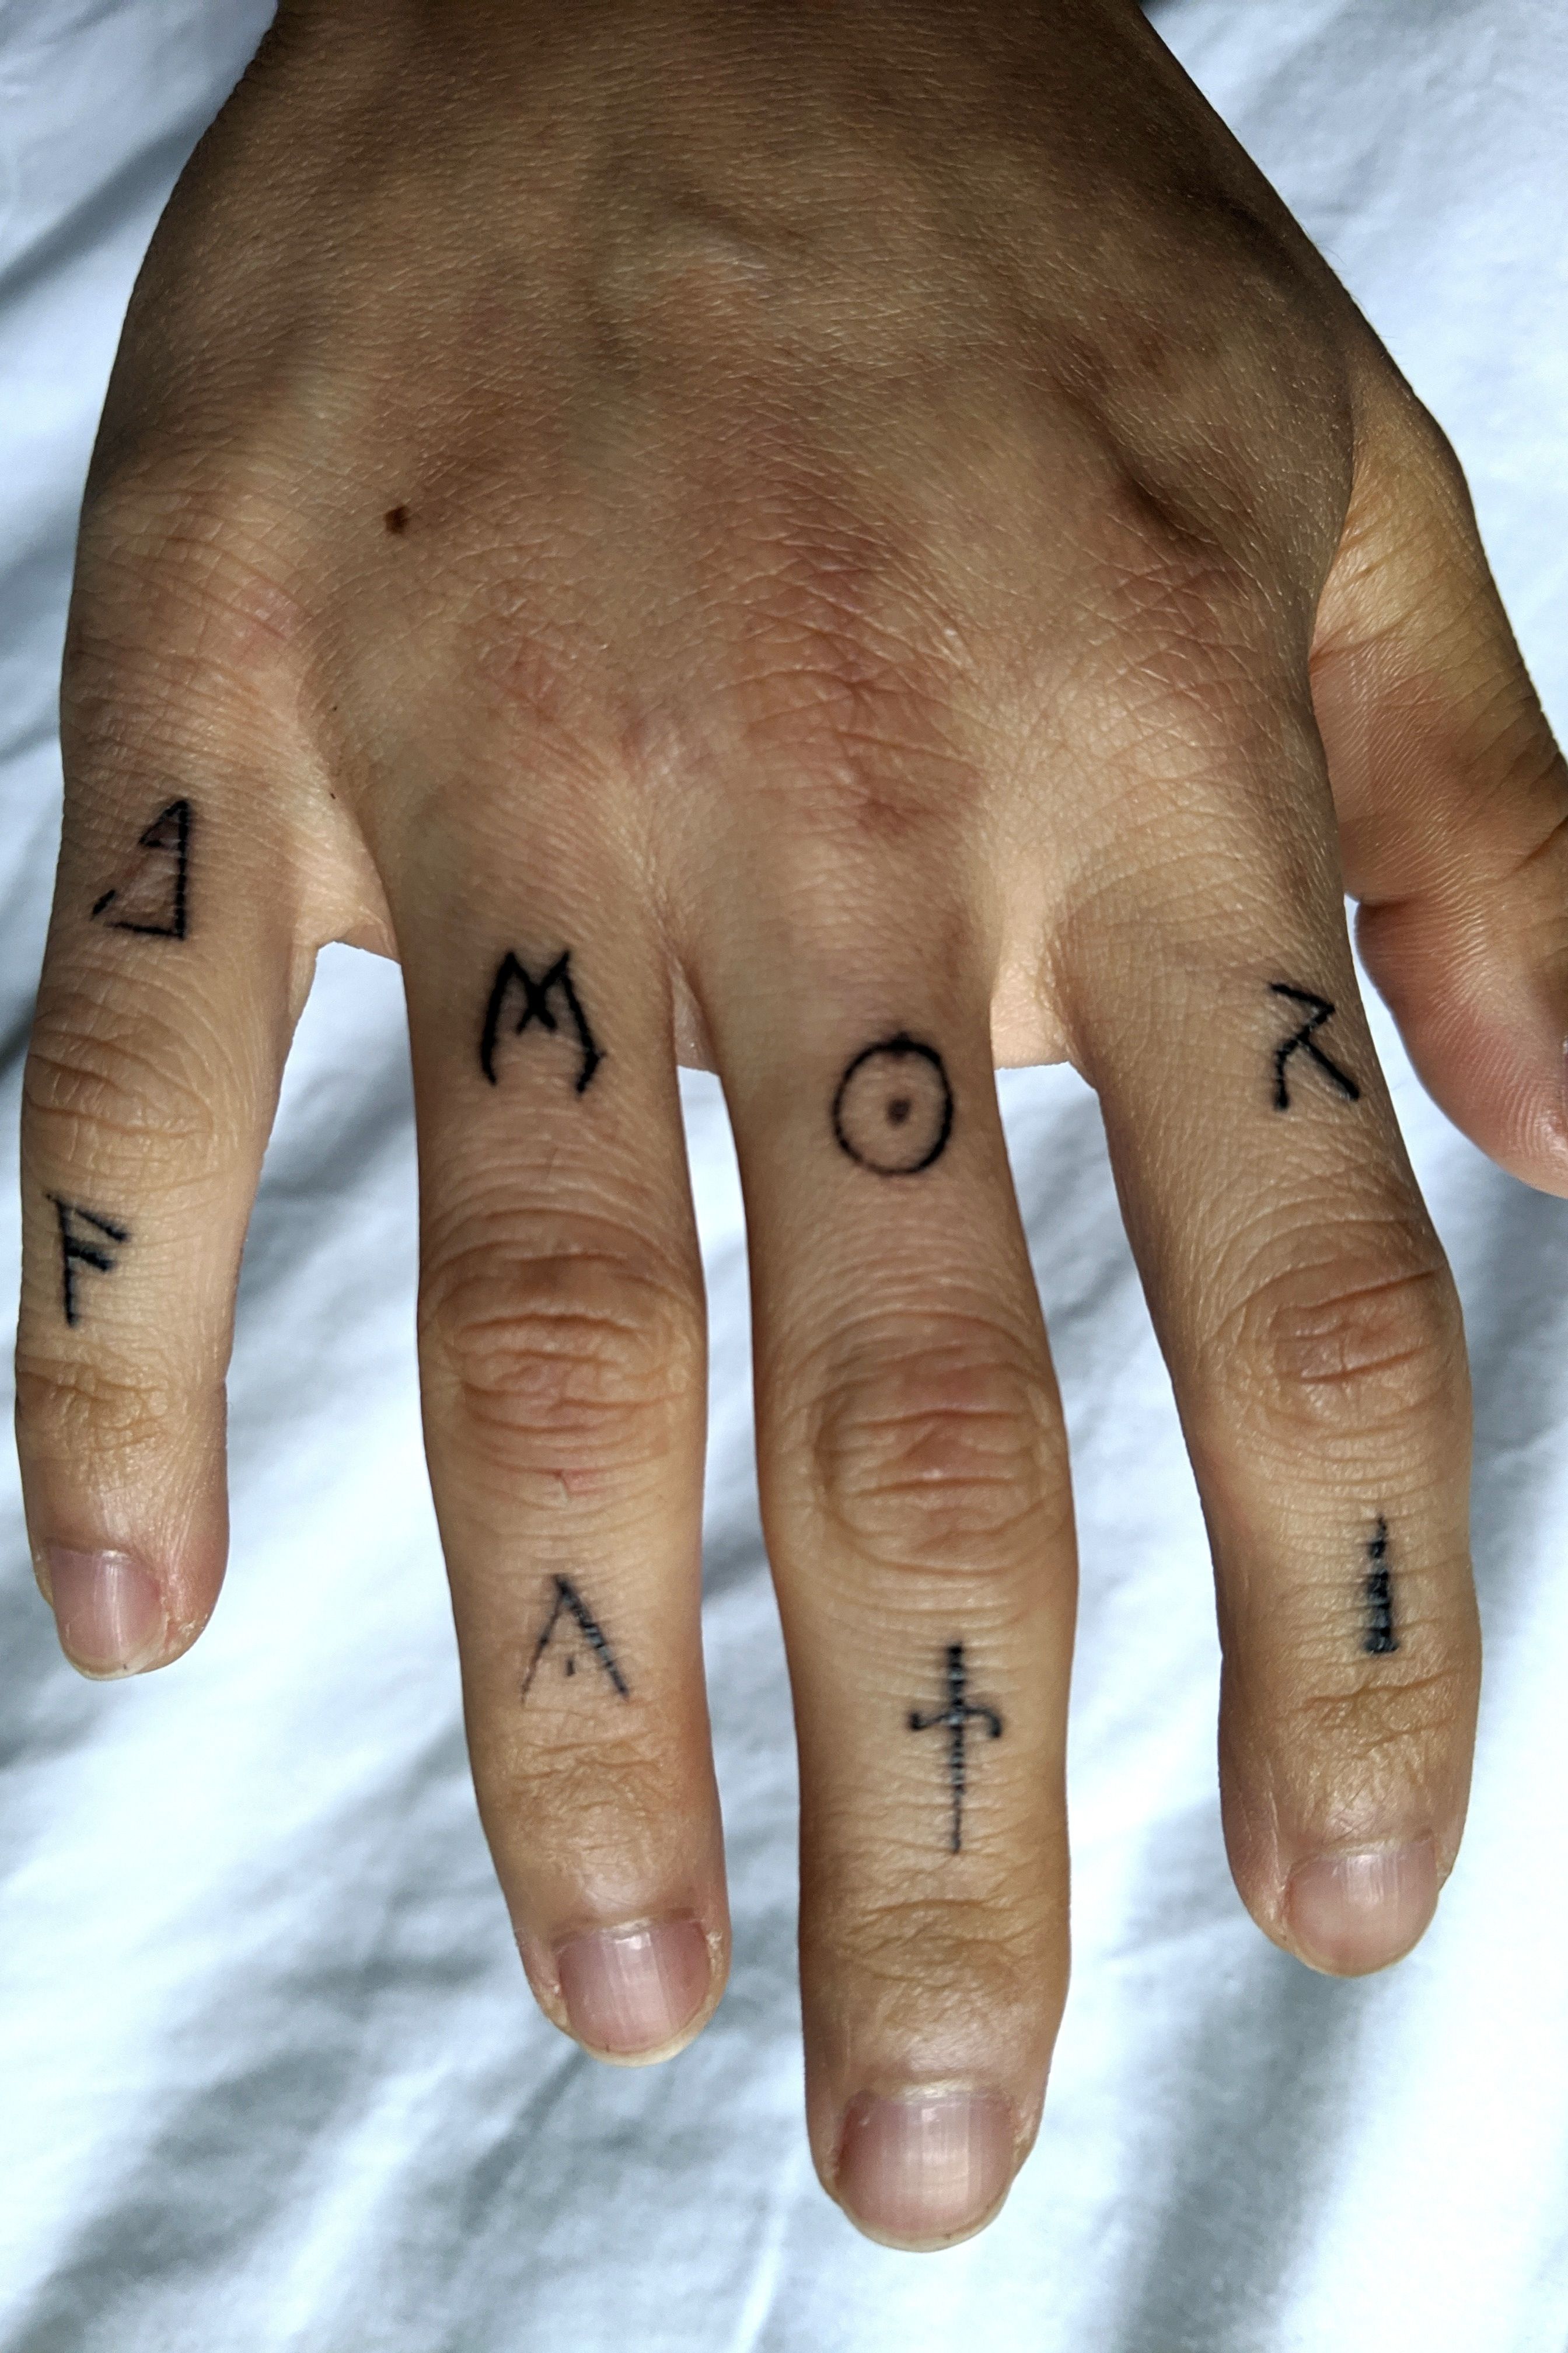 Amor Fati Memento Mori done by Lily Rafferty at Cock n Snook Newcastle UK   rtattoos